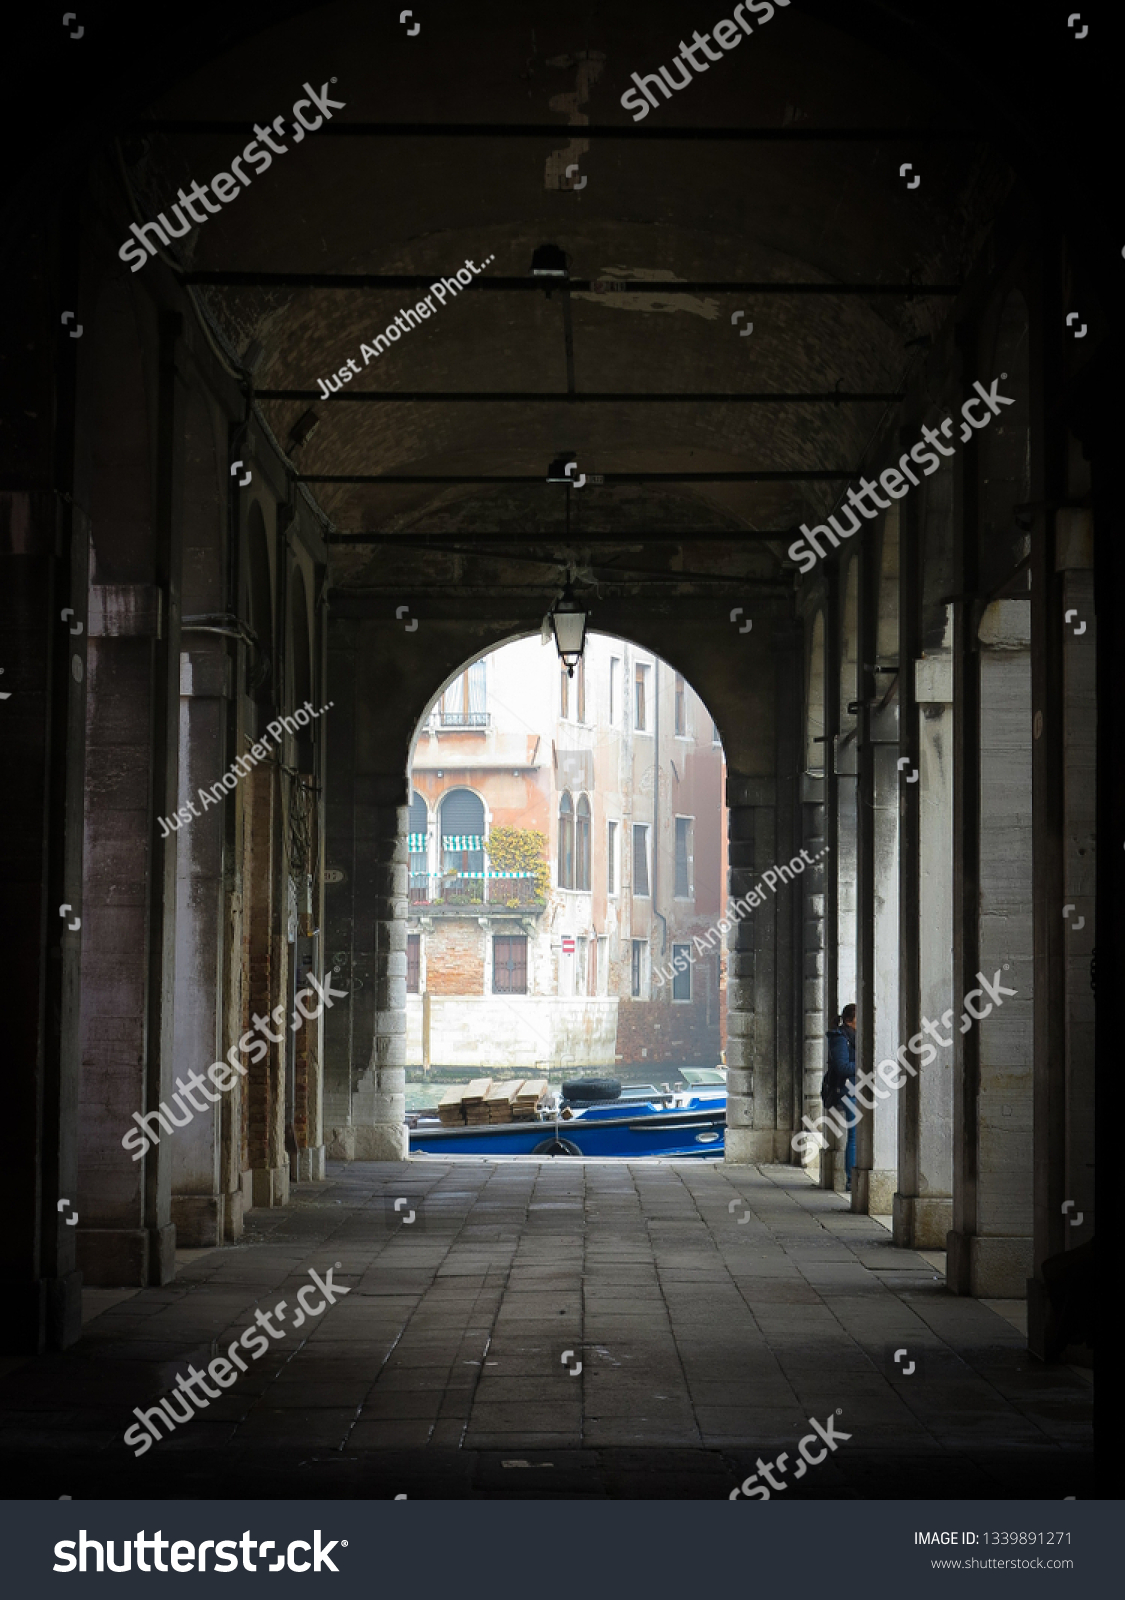 A boat on a canal seen through an archway in Venice, Italy.  Venice is famous for its canals, which are used instead of roads for transport throughout the city.   #1339891271